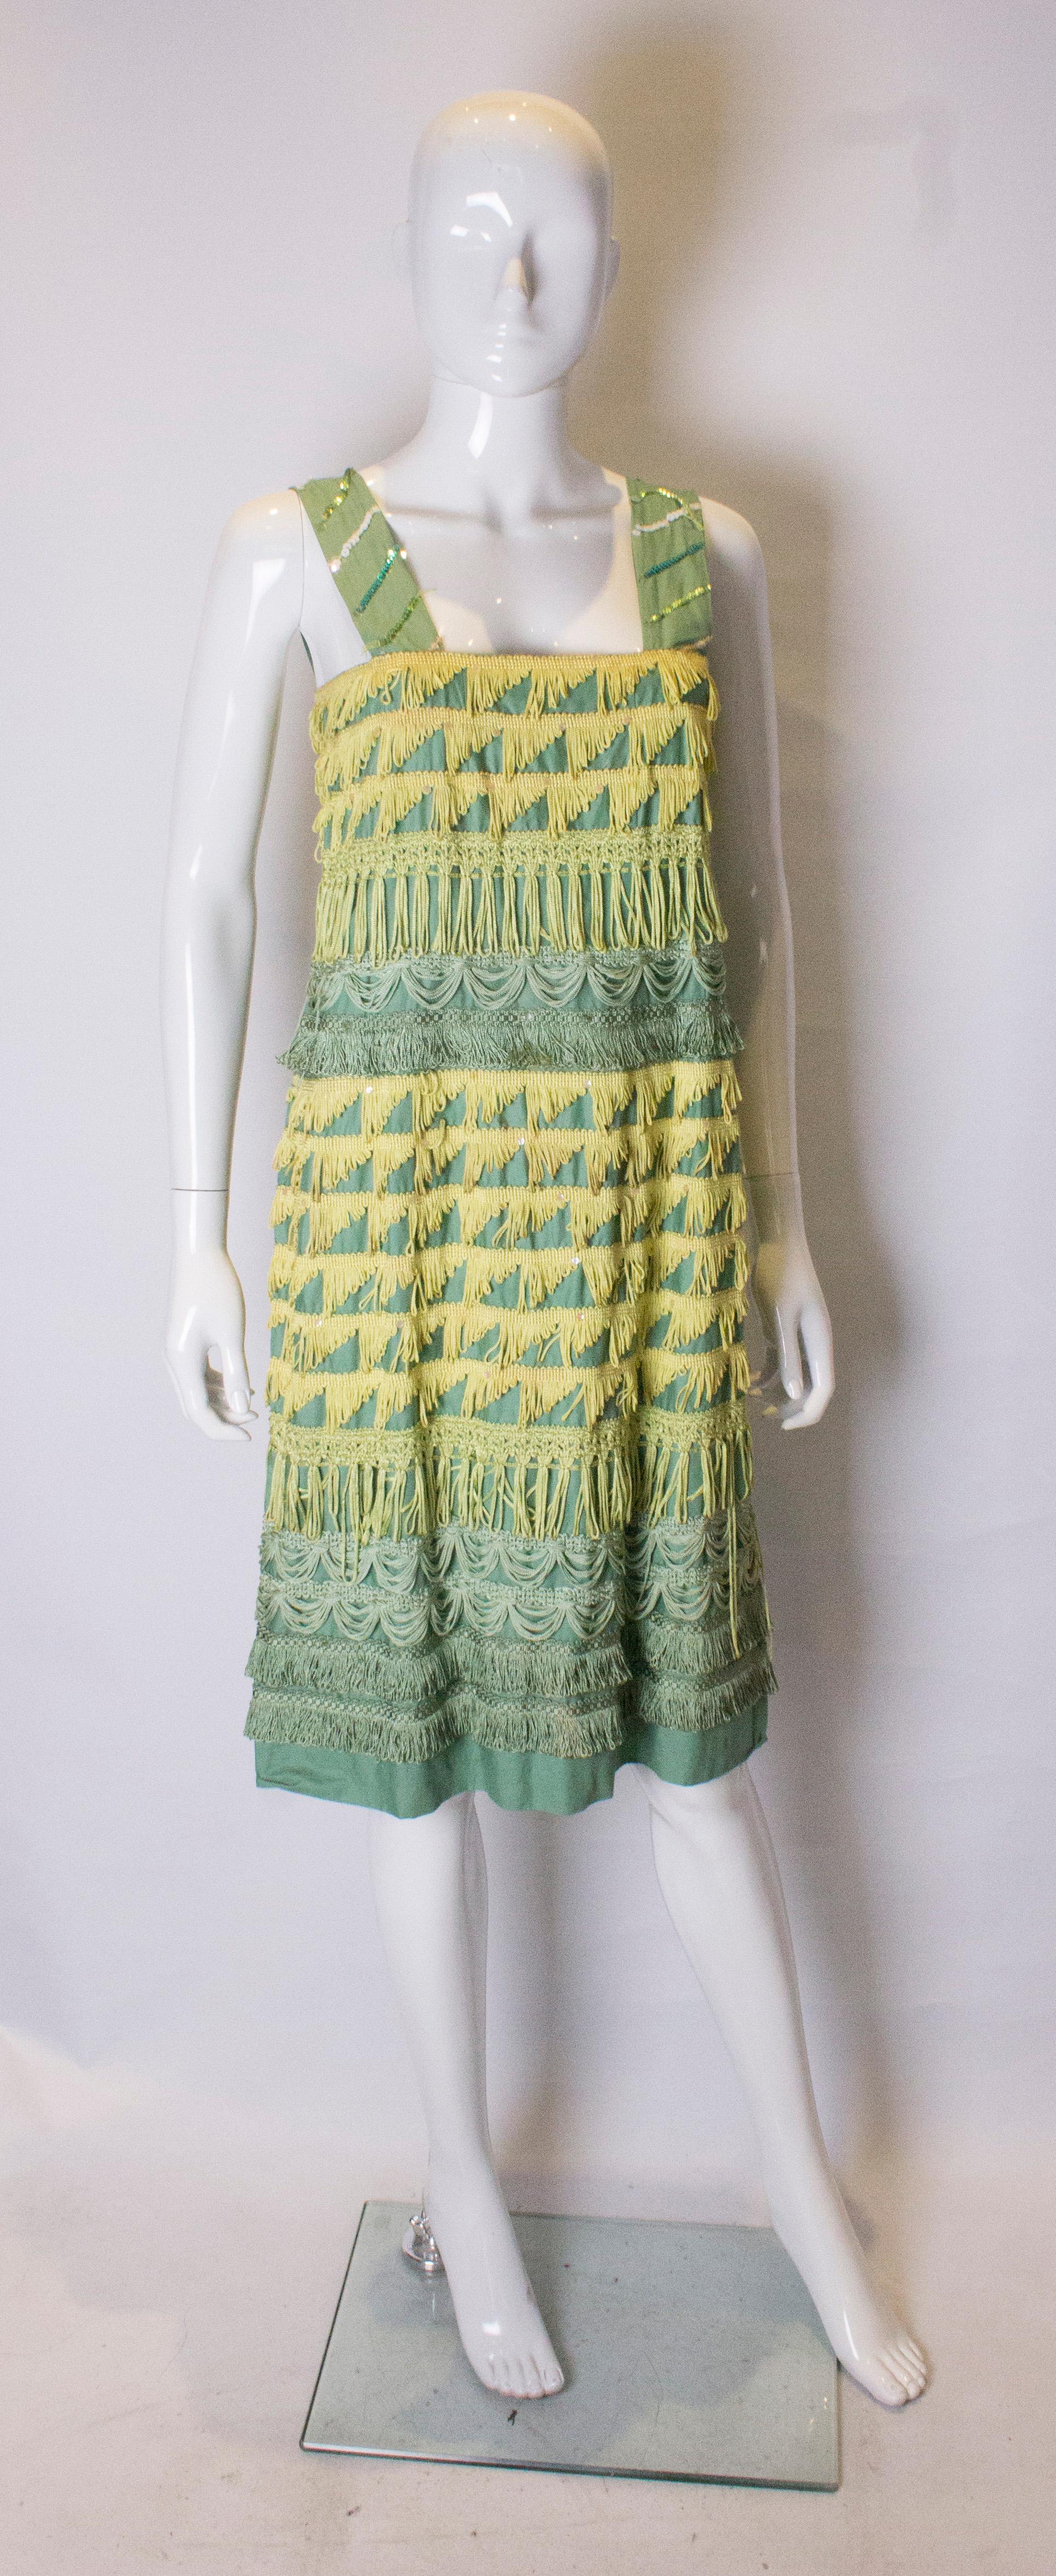 A chic cocktail dress for Spring.In wonderful shades of yellow and green with fringe detail. The dress has wide shoulder straps with sequin detail and a central back zip.